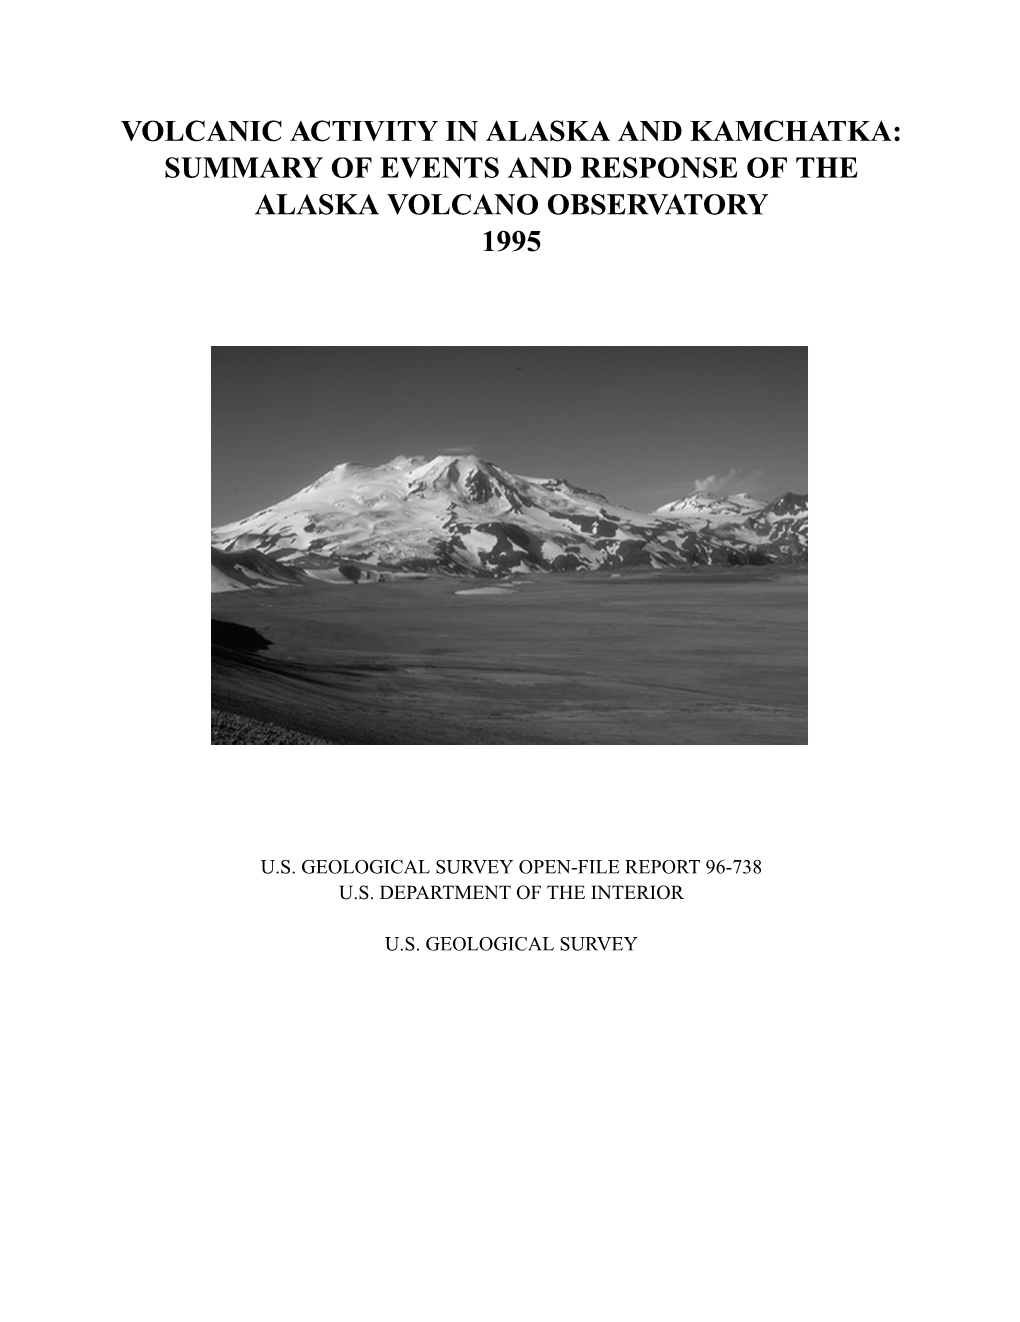 Volcanic Activity in Alaska and Kamchatka: Summary of Events and Response of the Alaska Volcano Observatory 1995